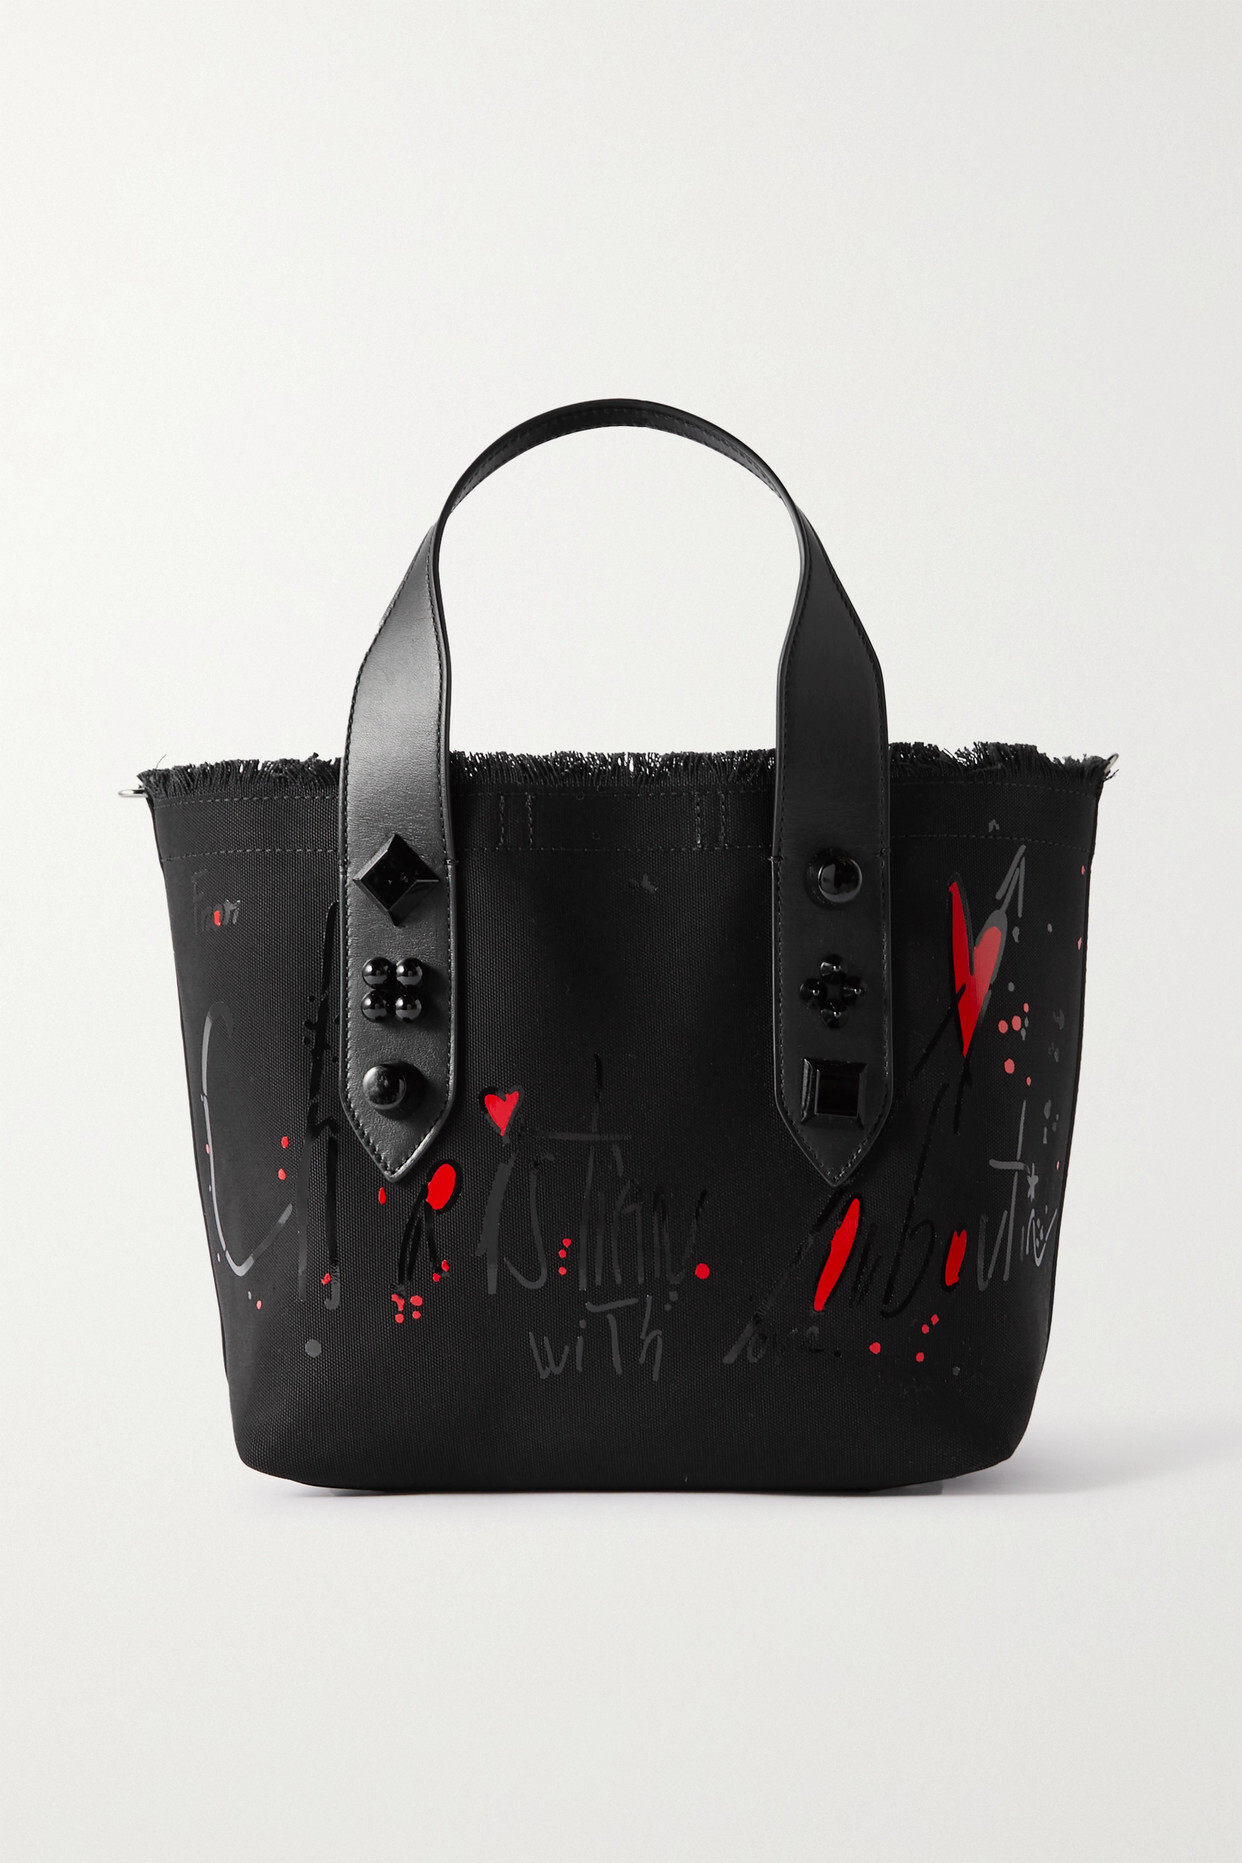 Christian Louboutin - Frangibus Leather-trimmed Frayed Printed Canvas Tote - Black